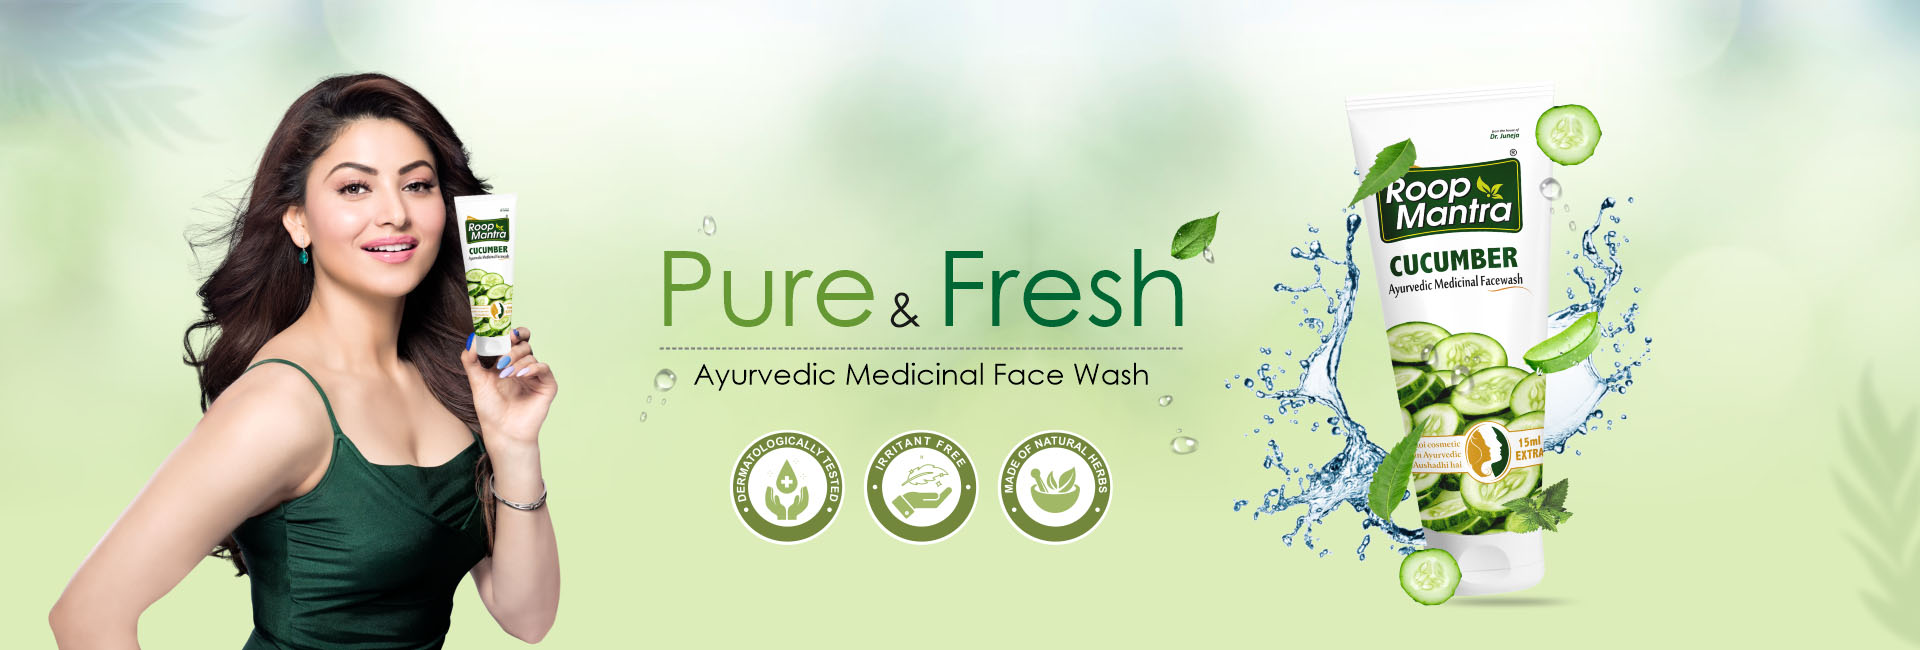 best-ayurvedic-roop-manta-Neem-and-Mix-Fruit-lime-mint-aloevera-cucumber-face-wash